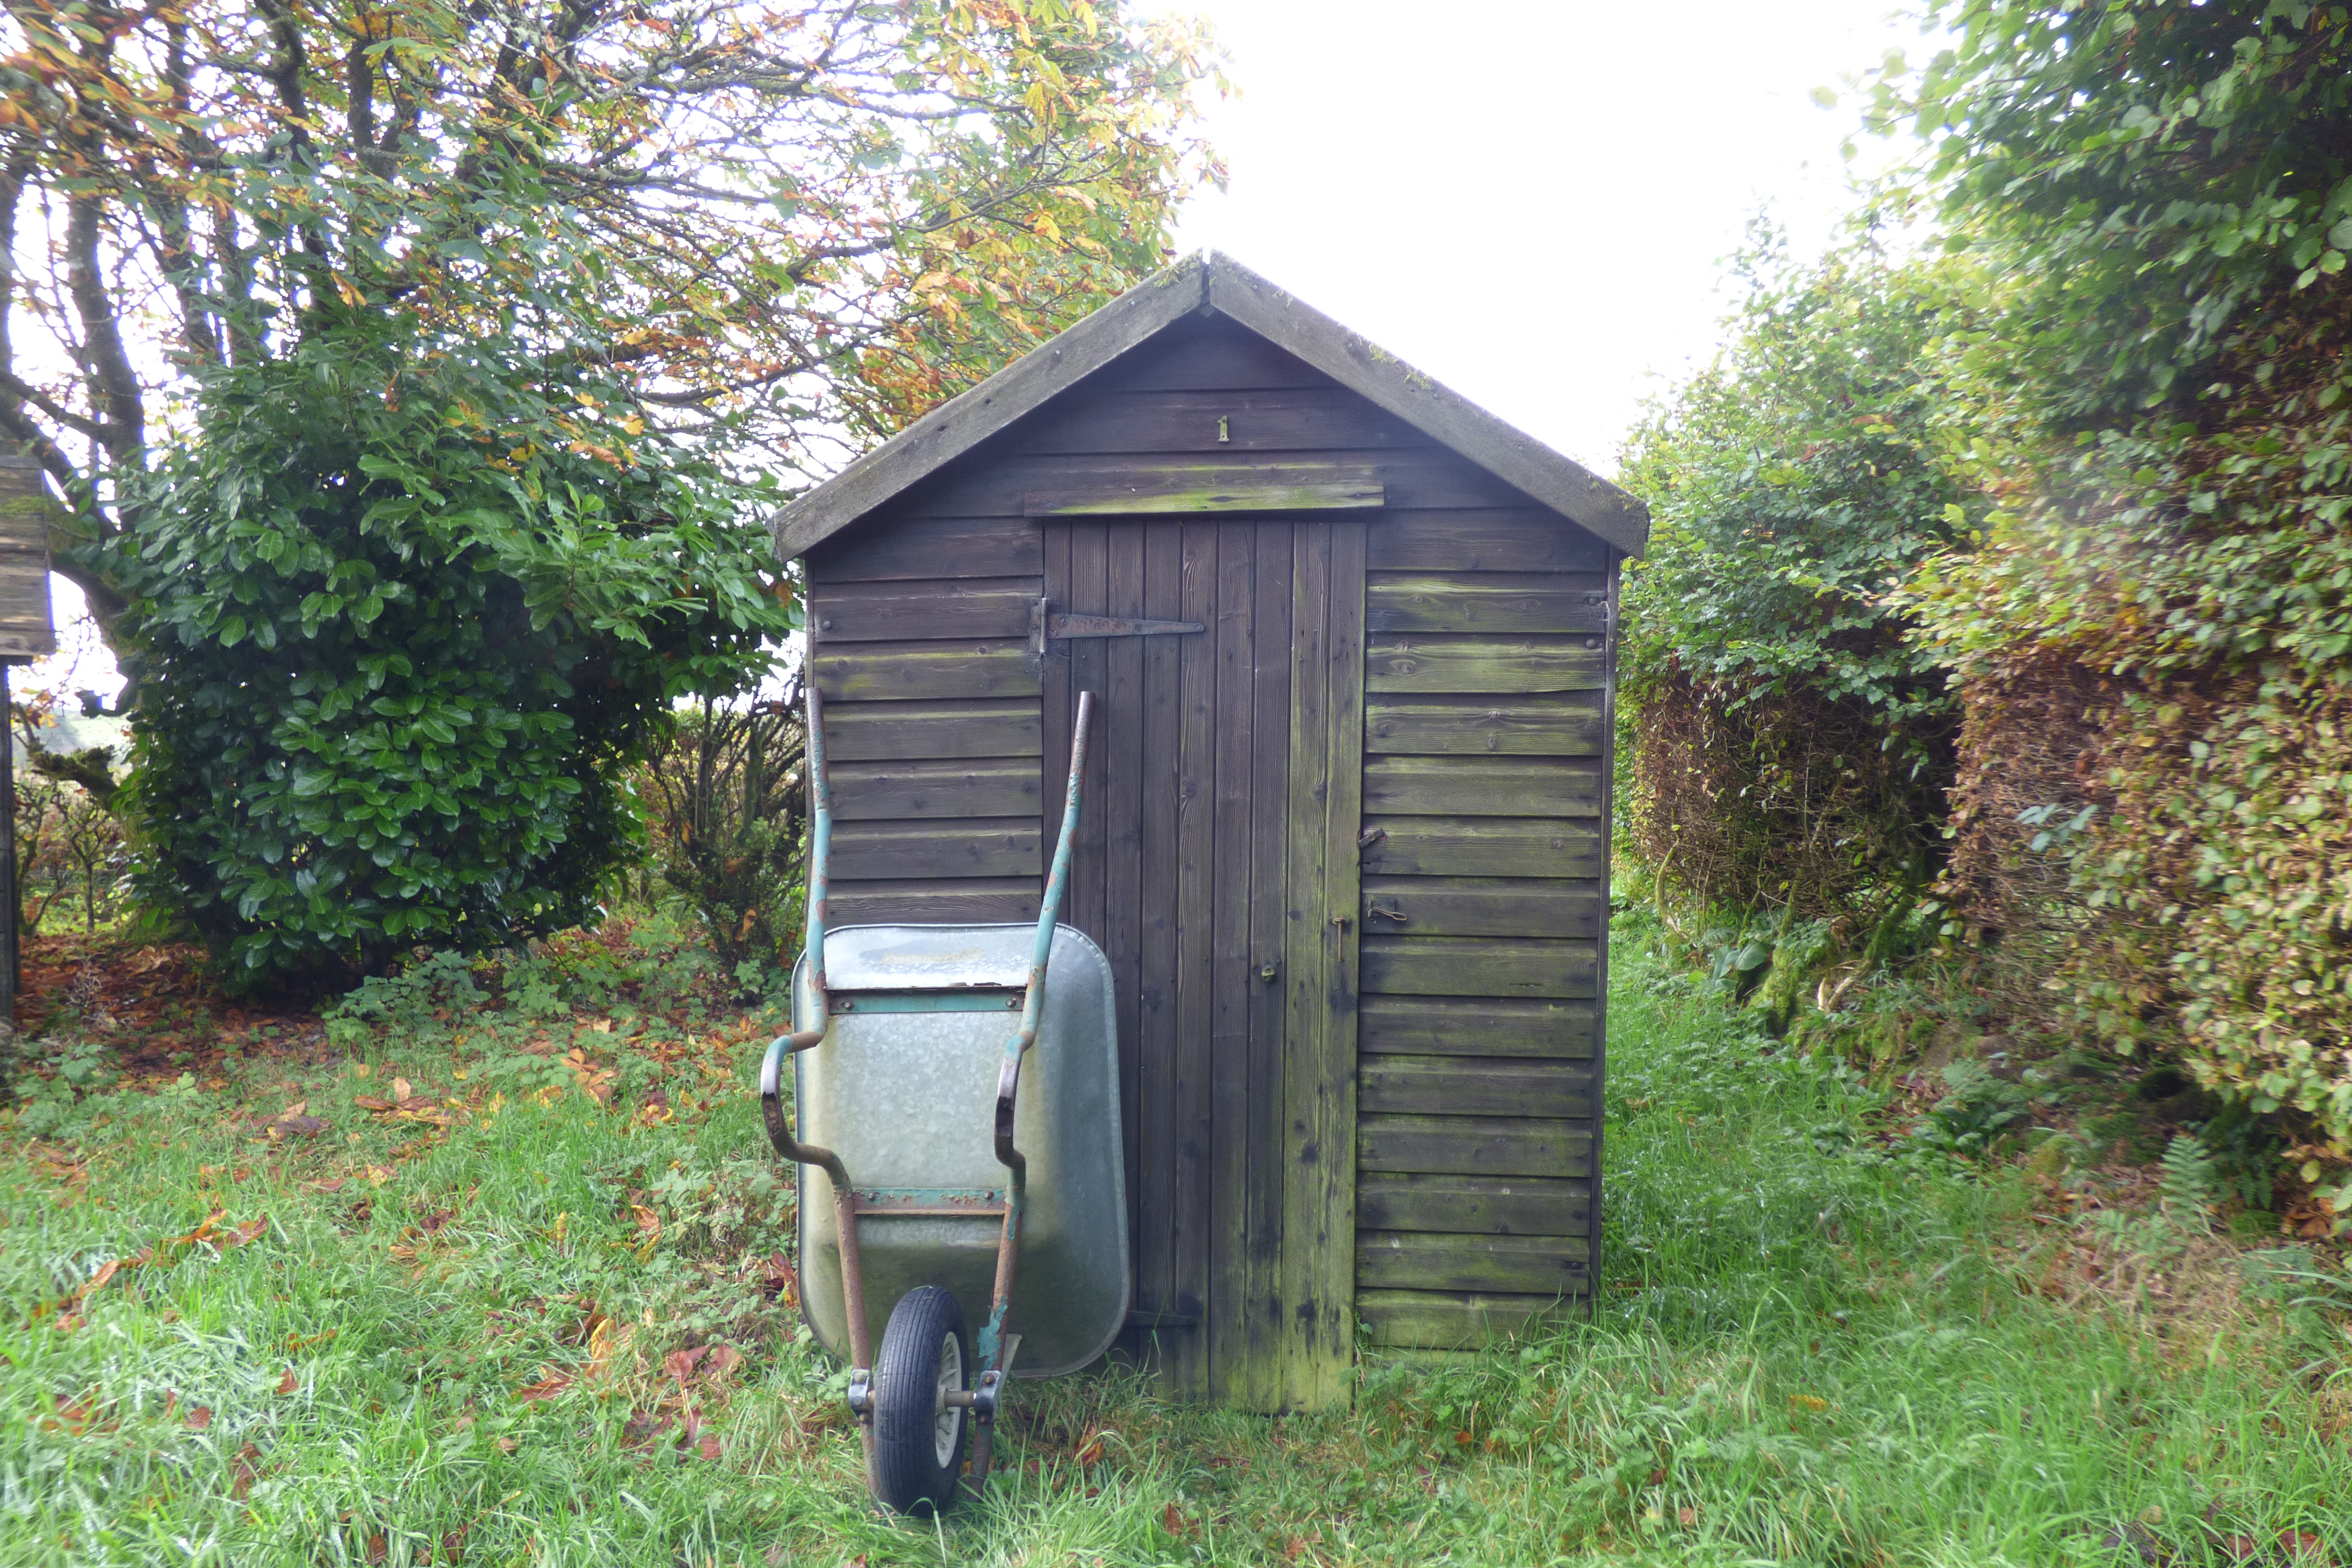 Photograph of Garden Shed